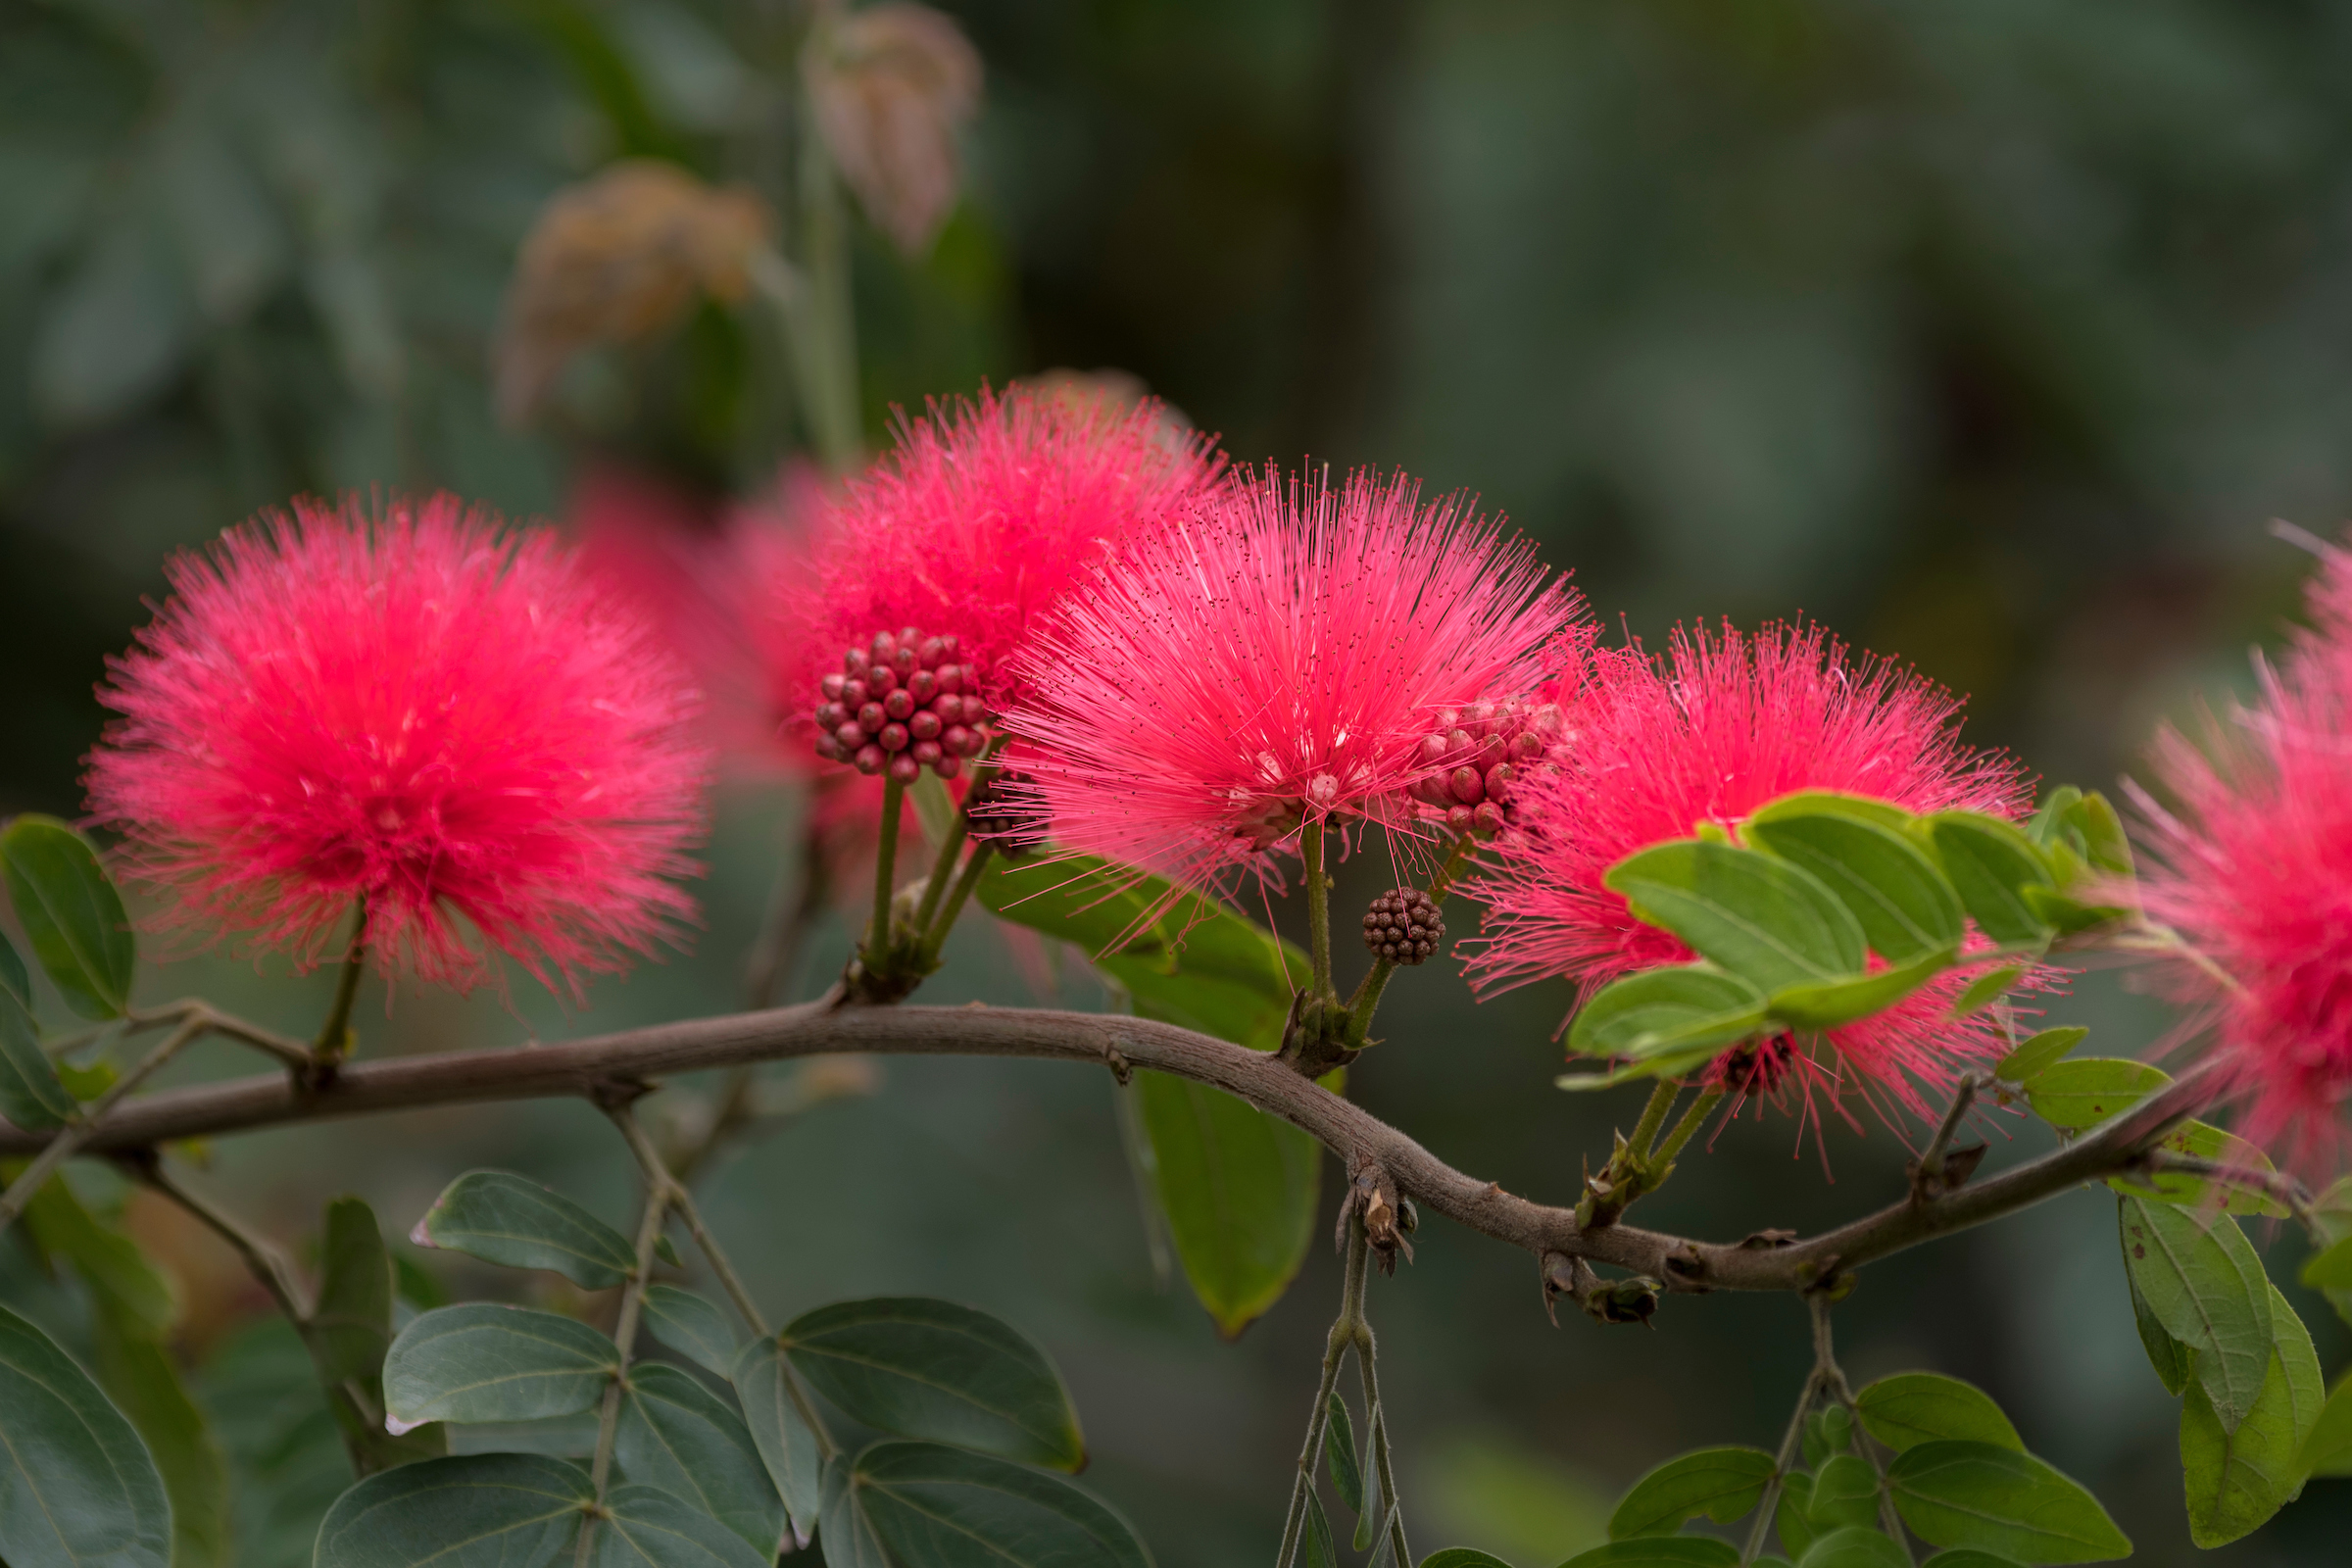 Closeup on four pink flowers that resemble powder puffs, in bloom on a Calliandra plant.